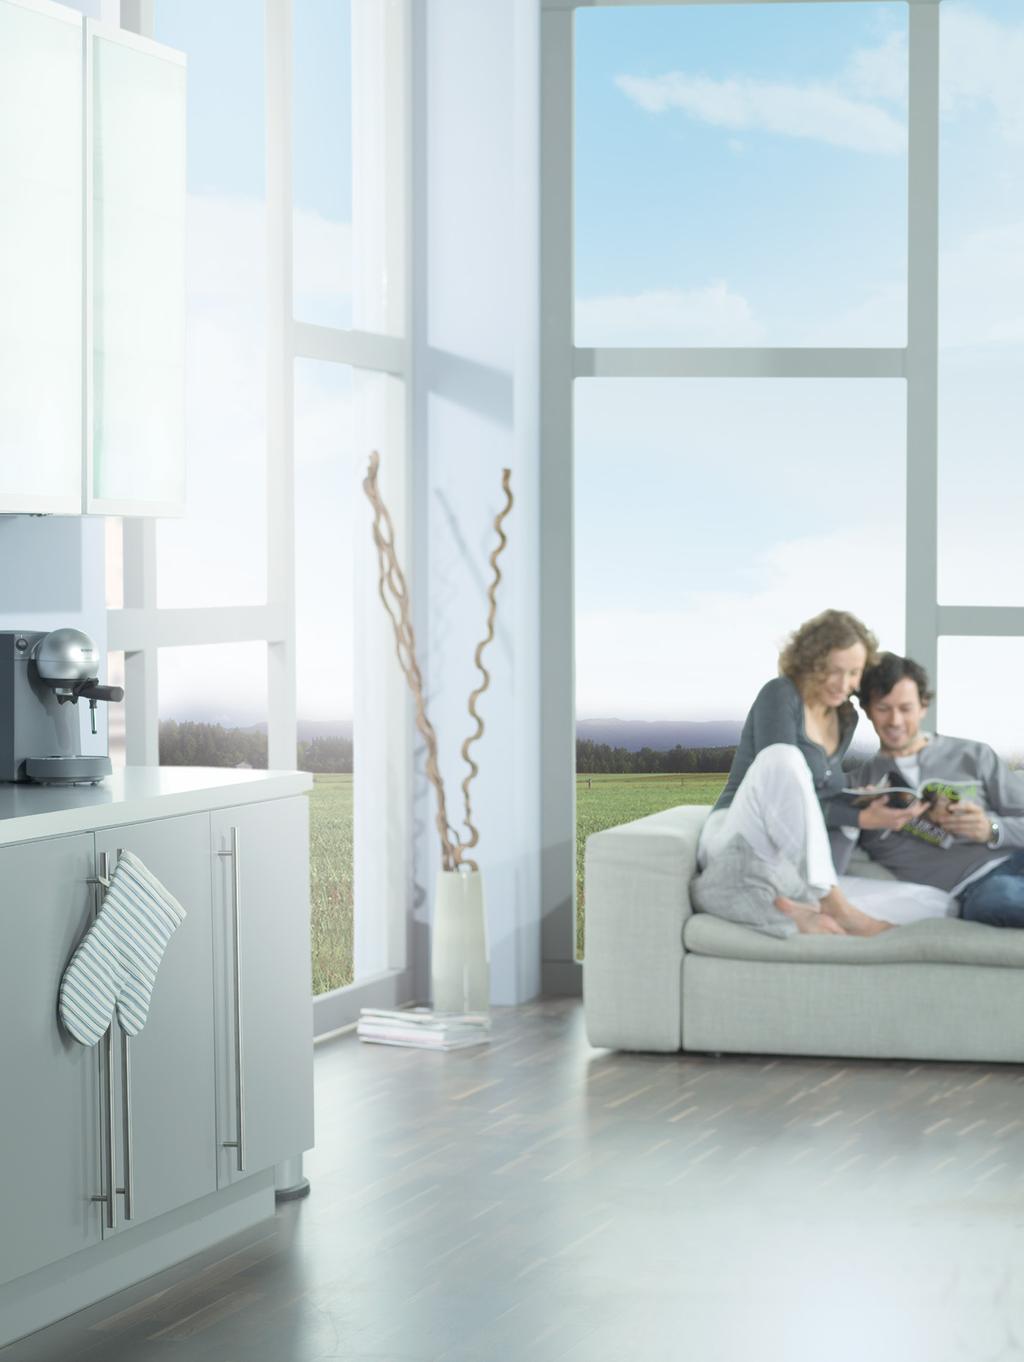 Inverter Ducted Split Air Source Heat Pump System with Inverter Drive Technology Simply Smart The robust Bosch Inverter Ducted Split air-source heat pump system utilizes just